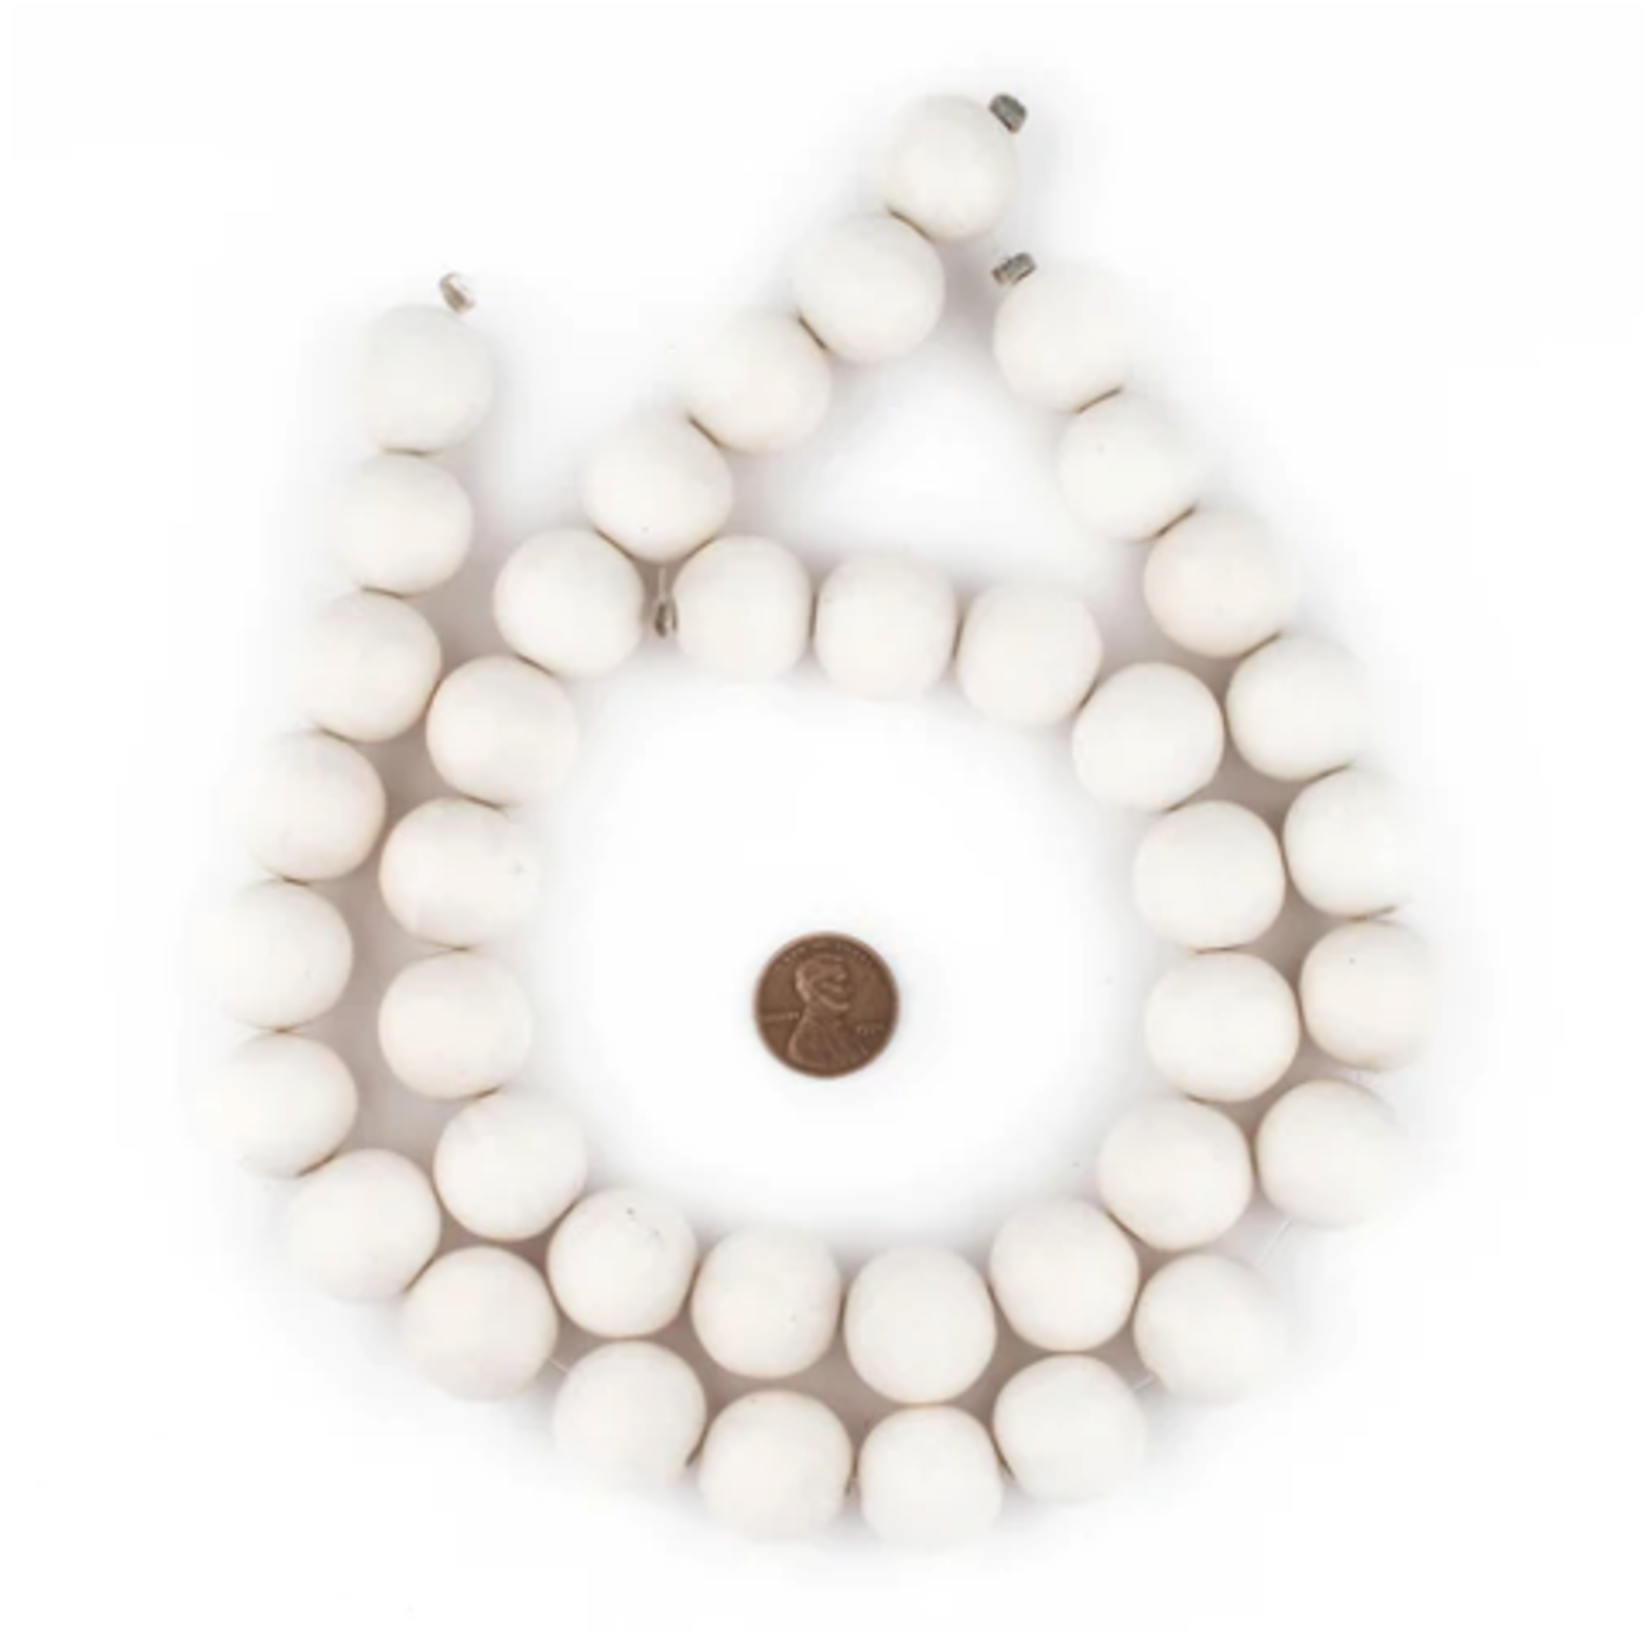 Outside The Box 39" White Natural Wood 20mm Beads With Tassel